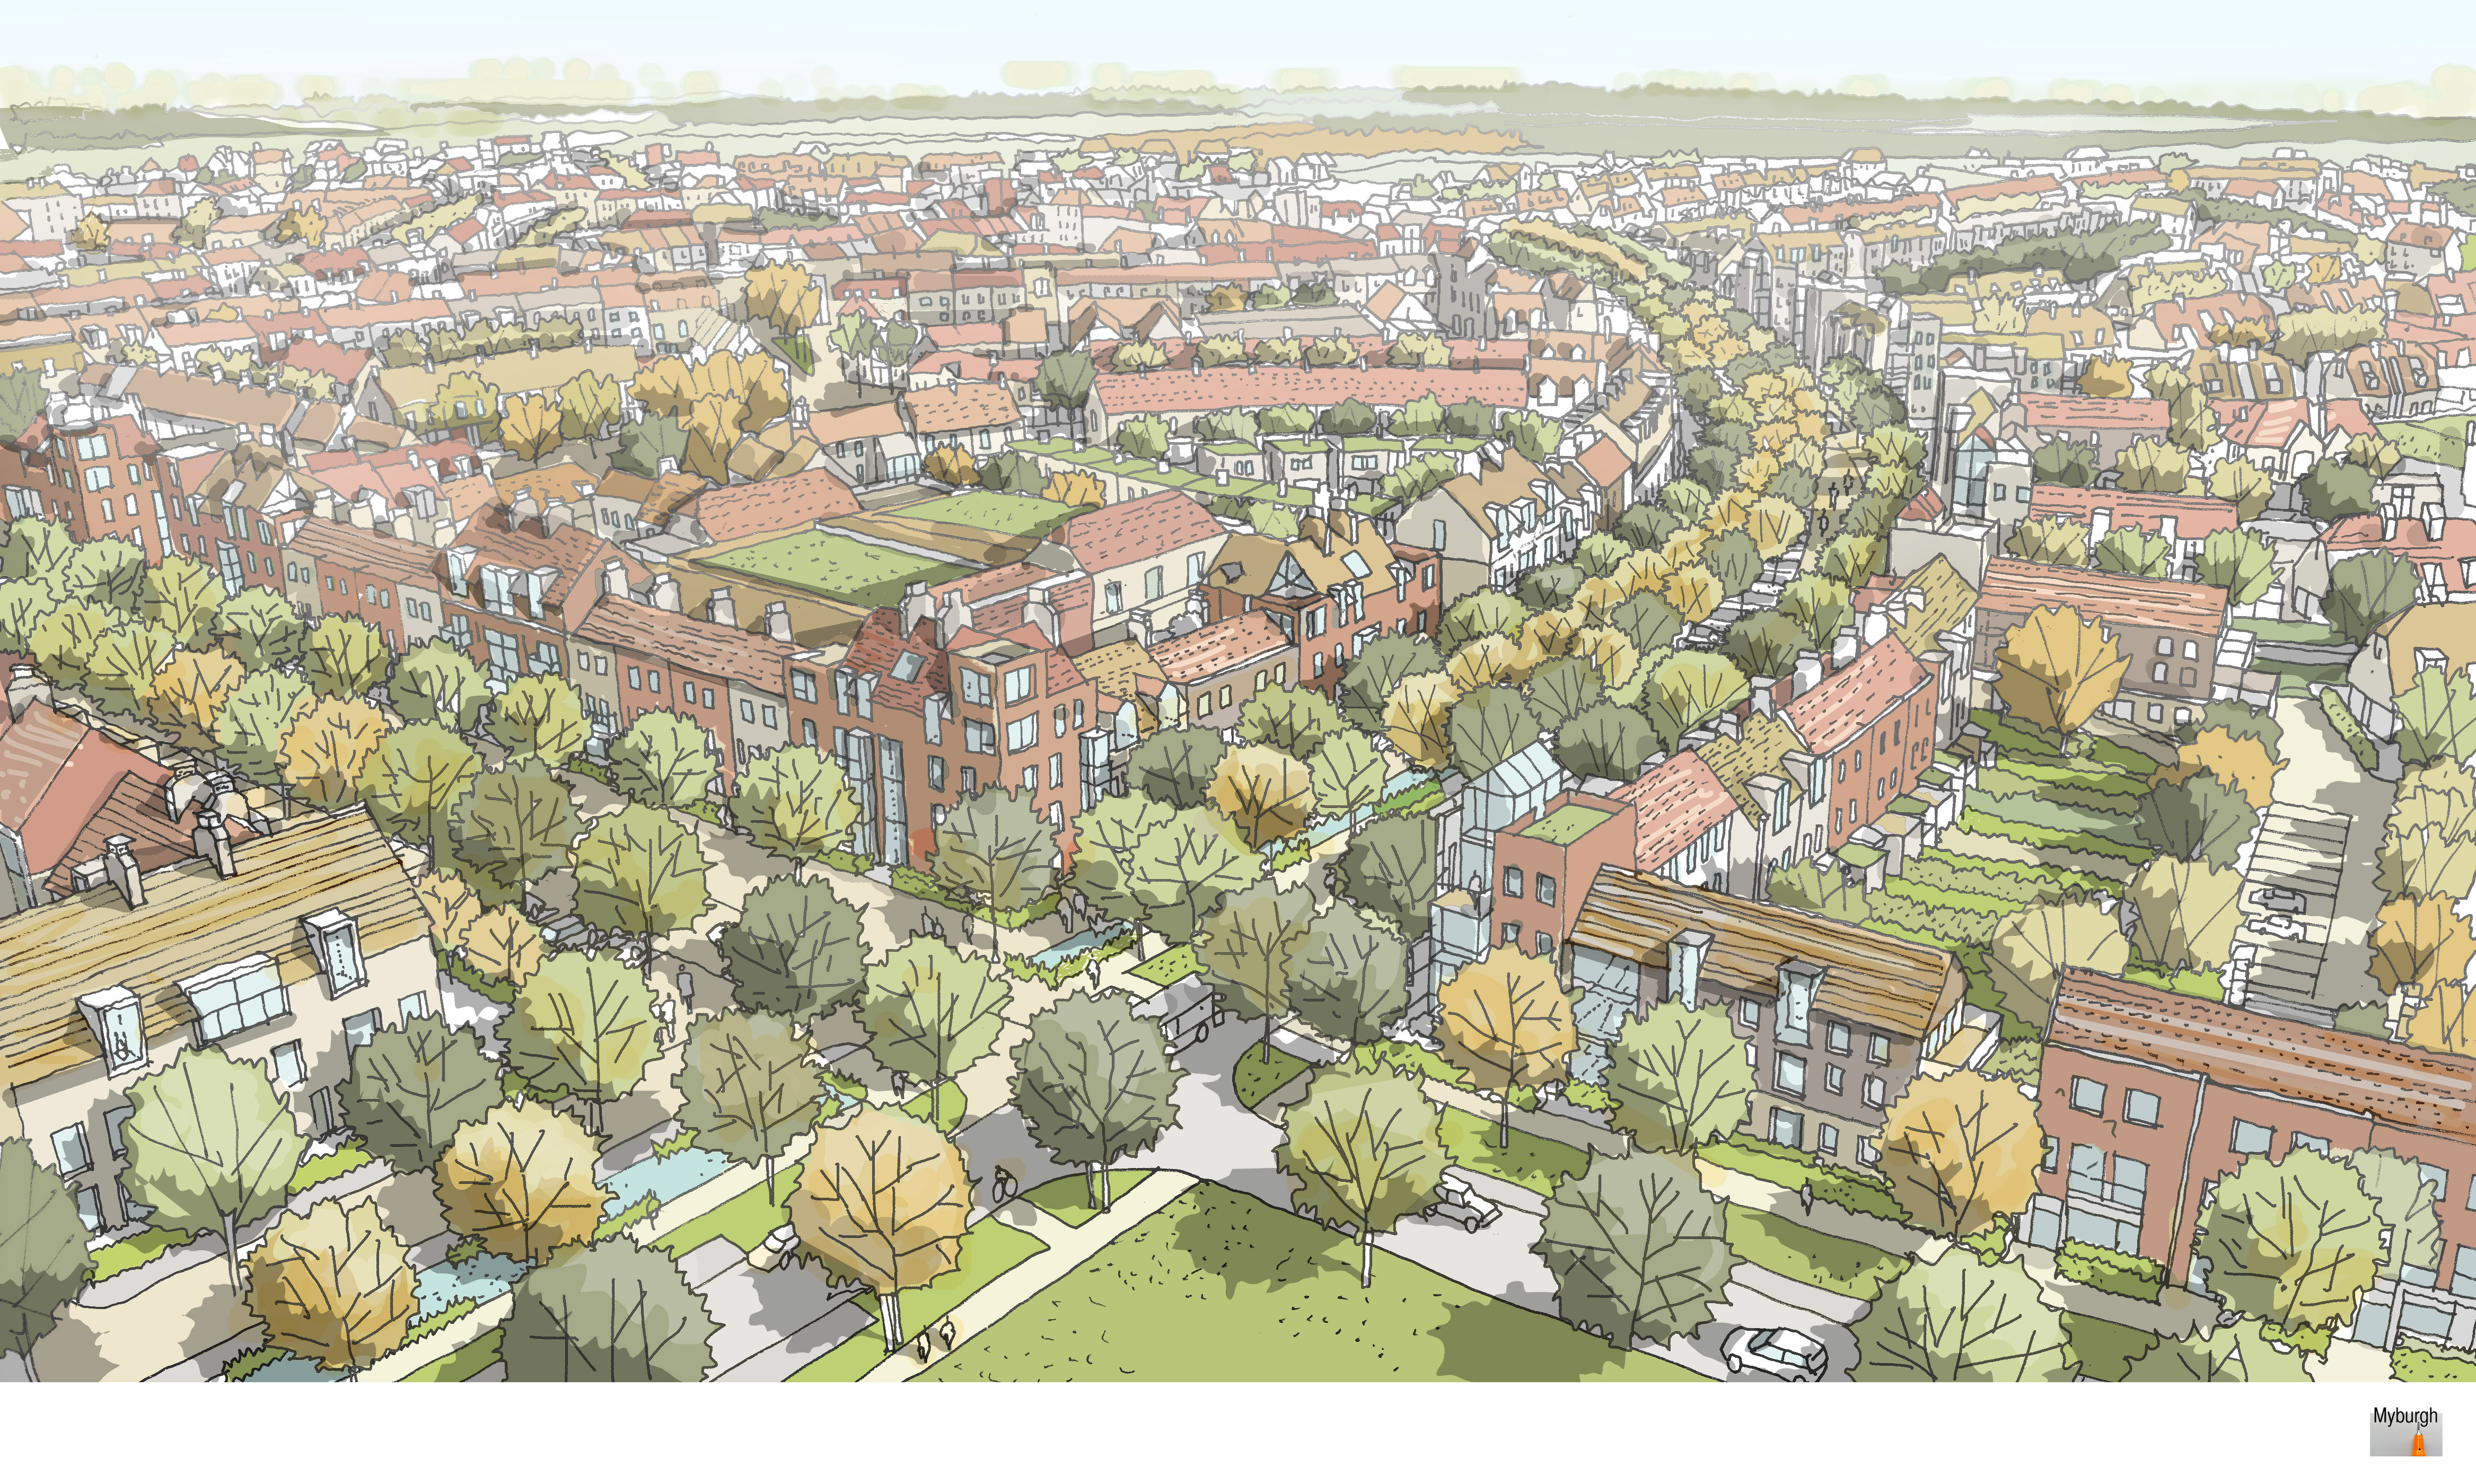 Delivering the first new planned Surrey village for over 100 years - and creating a new concept in sustainable rural living